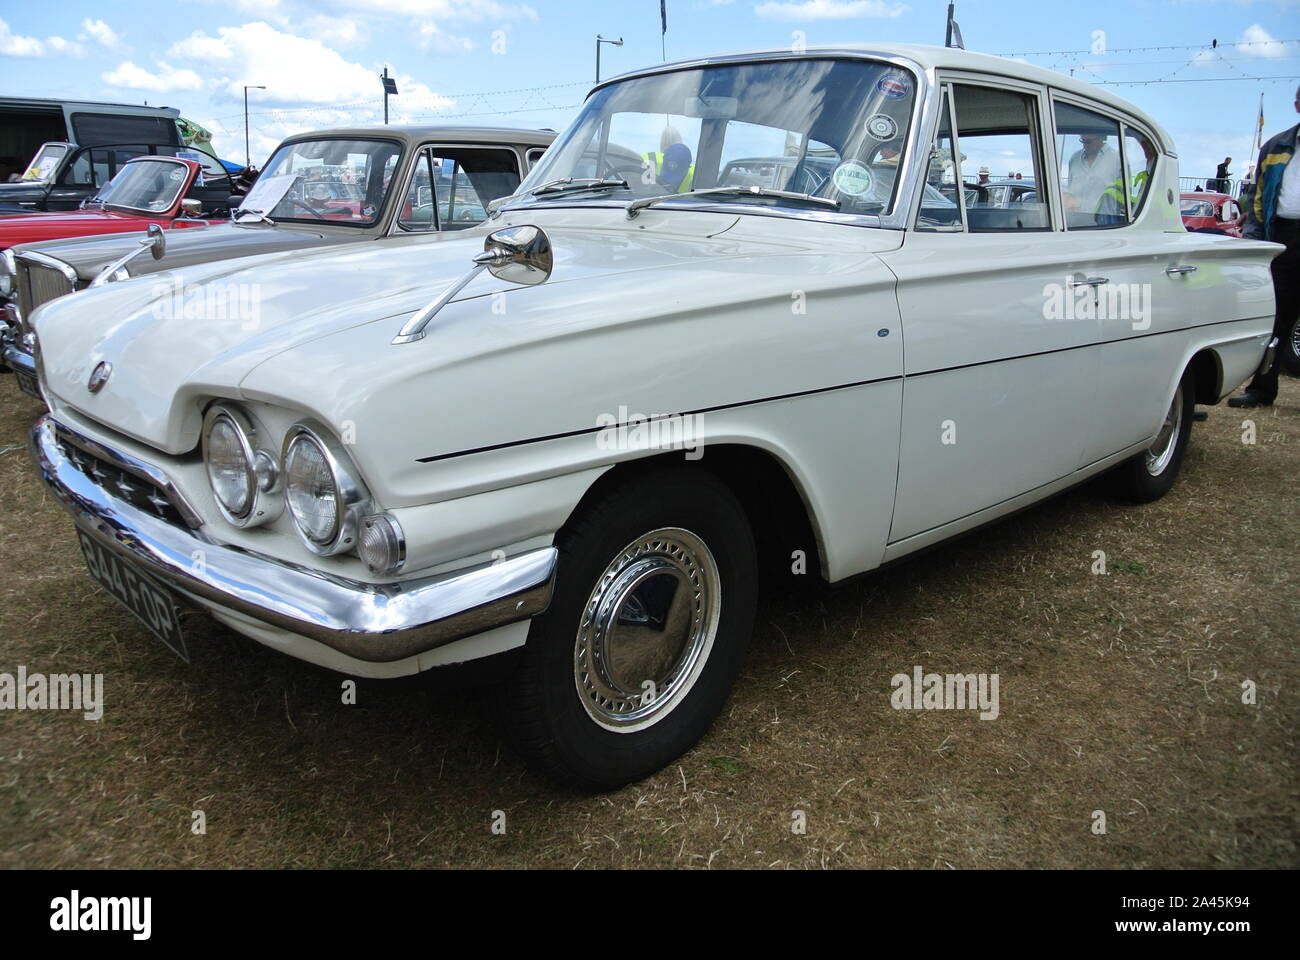 A 1962 Ford Consul Classic car parked up on display at the English Riviera classic car show, Paignton, Devon, England, UK. Stock Photo